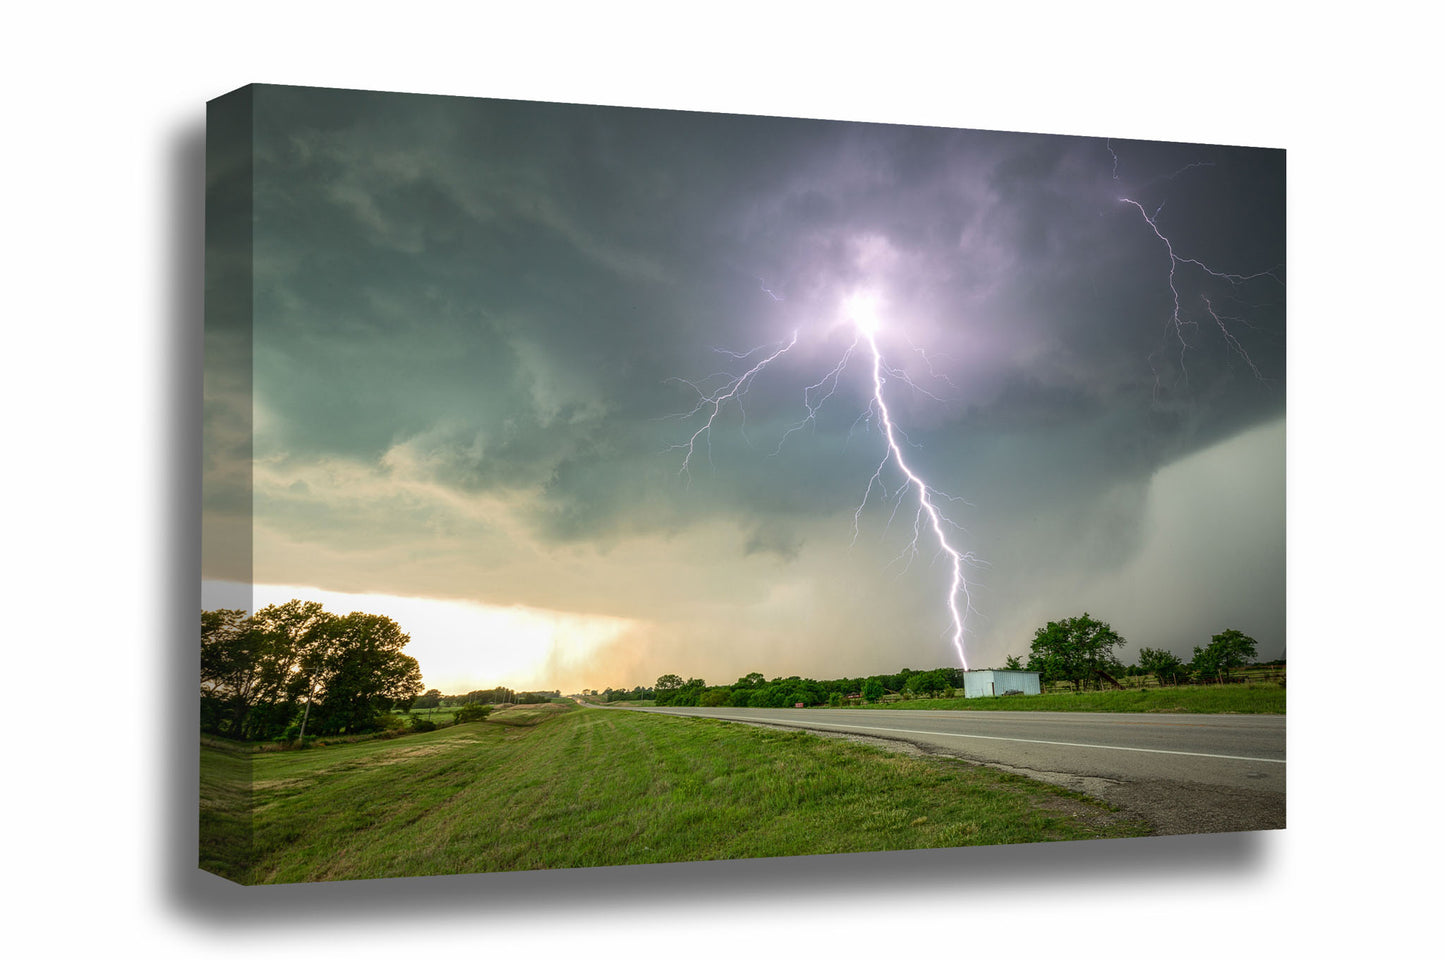 Storm canvas wall art of a powerful lightning bolt striking nearby on a stormy spring day in Kansas by Sean Ramsey of Southern Plains Photography.